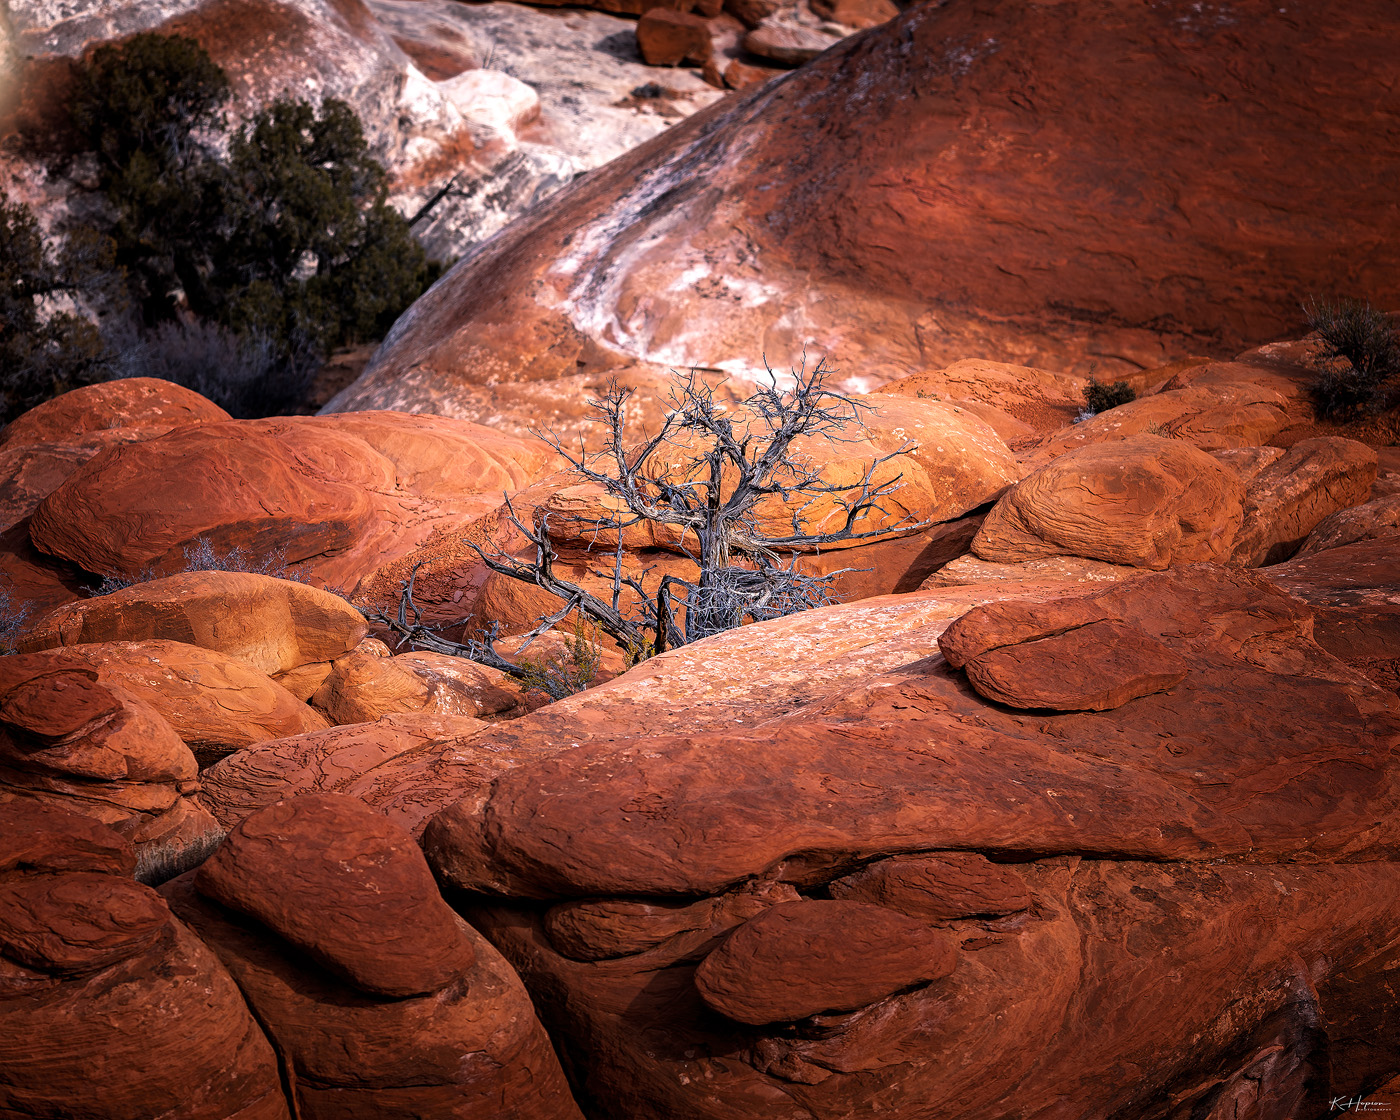 An old tree grows in sedimentary rock in Arches National Park, Utah.